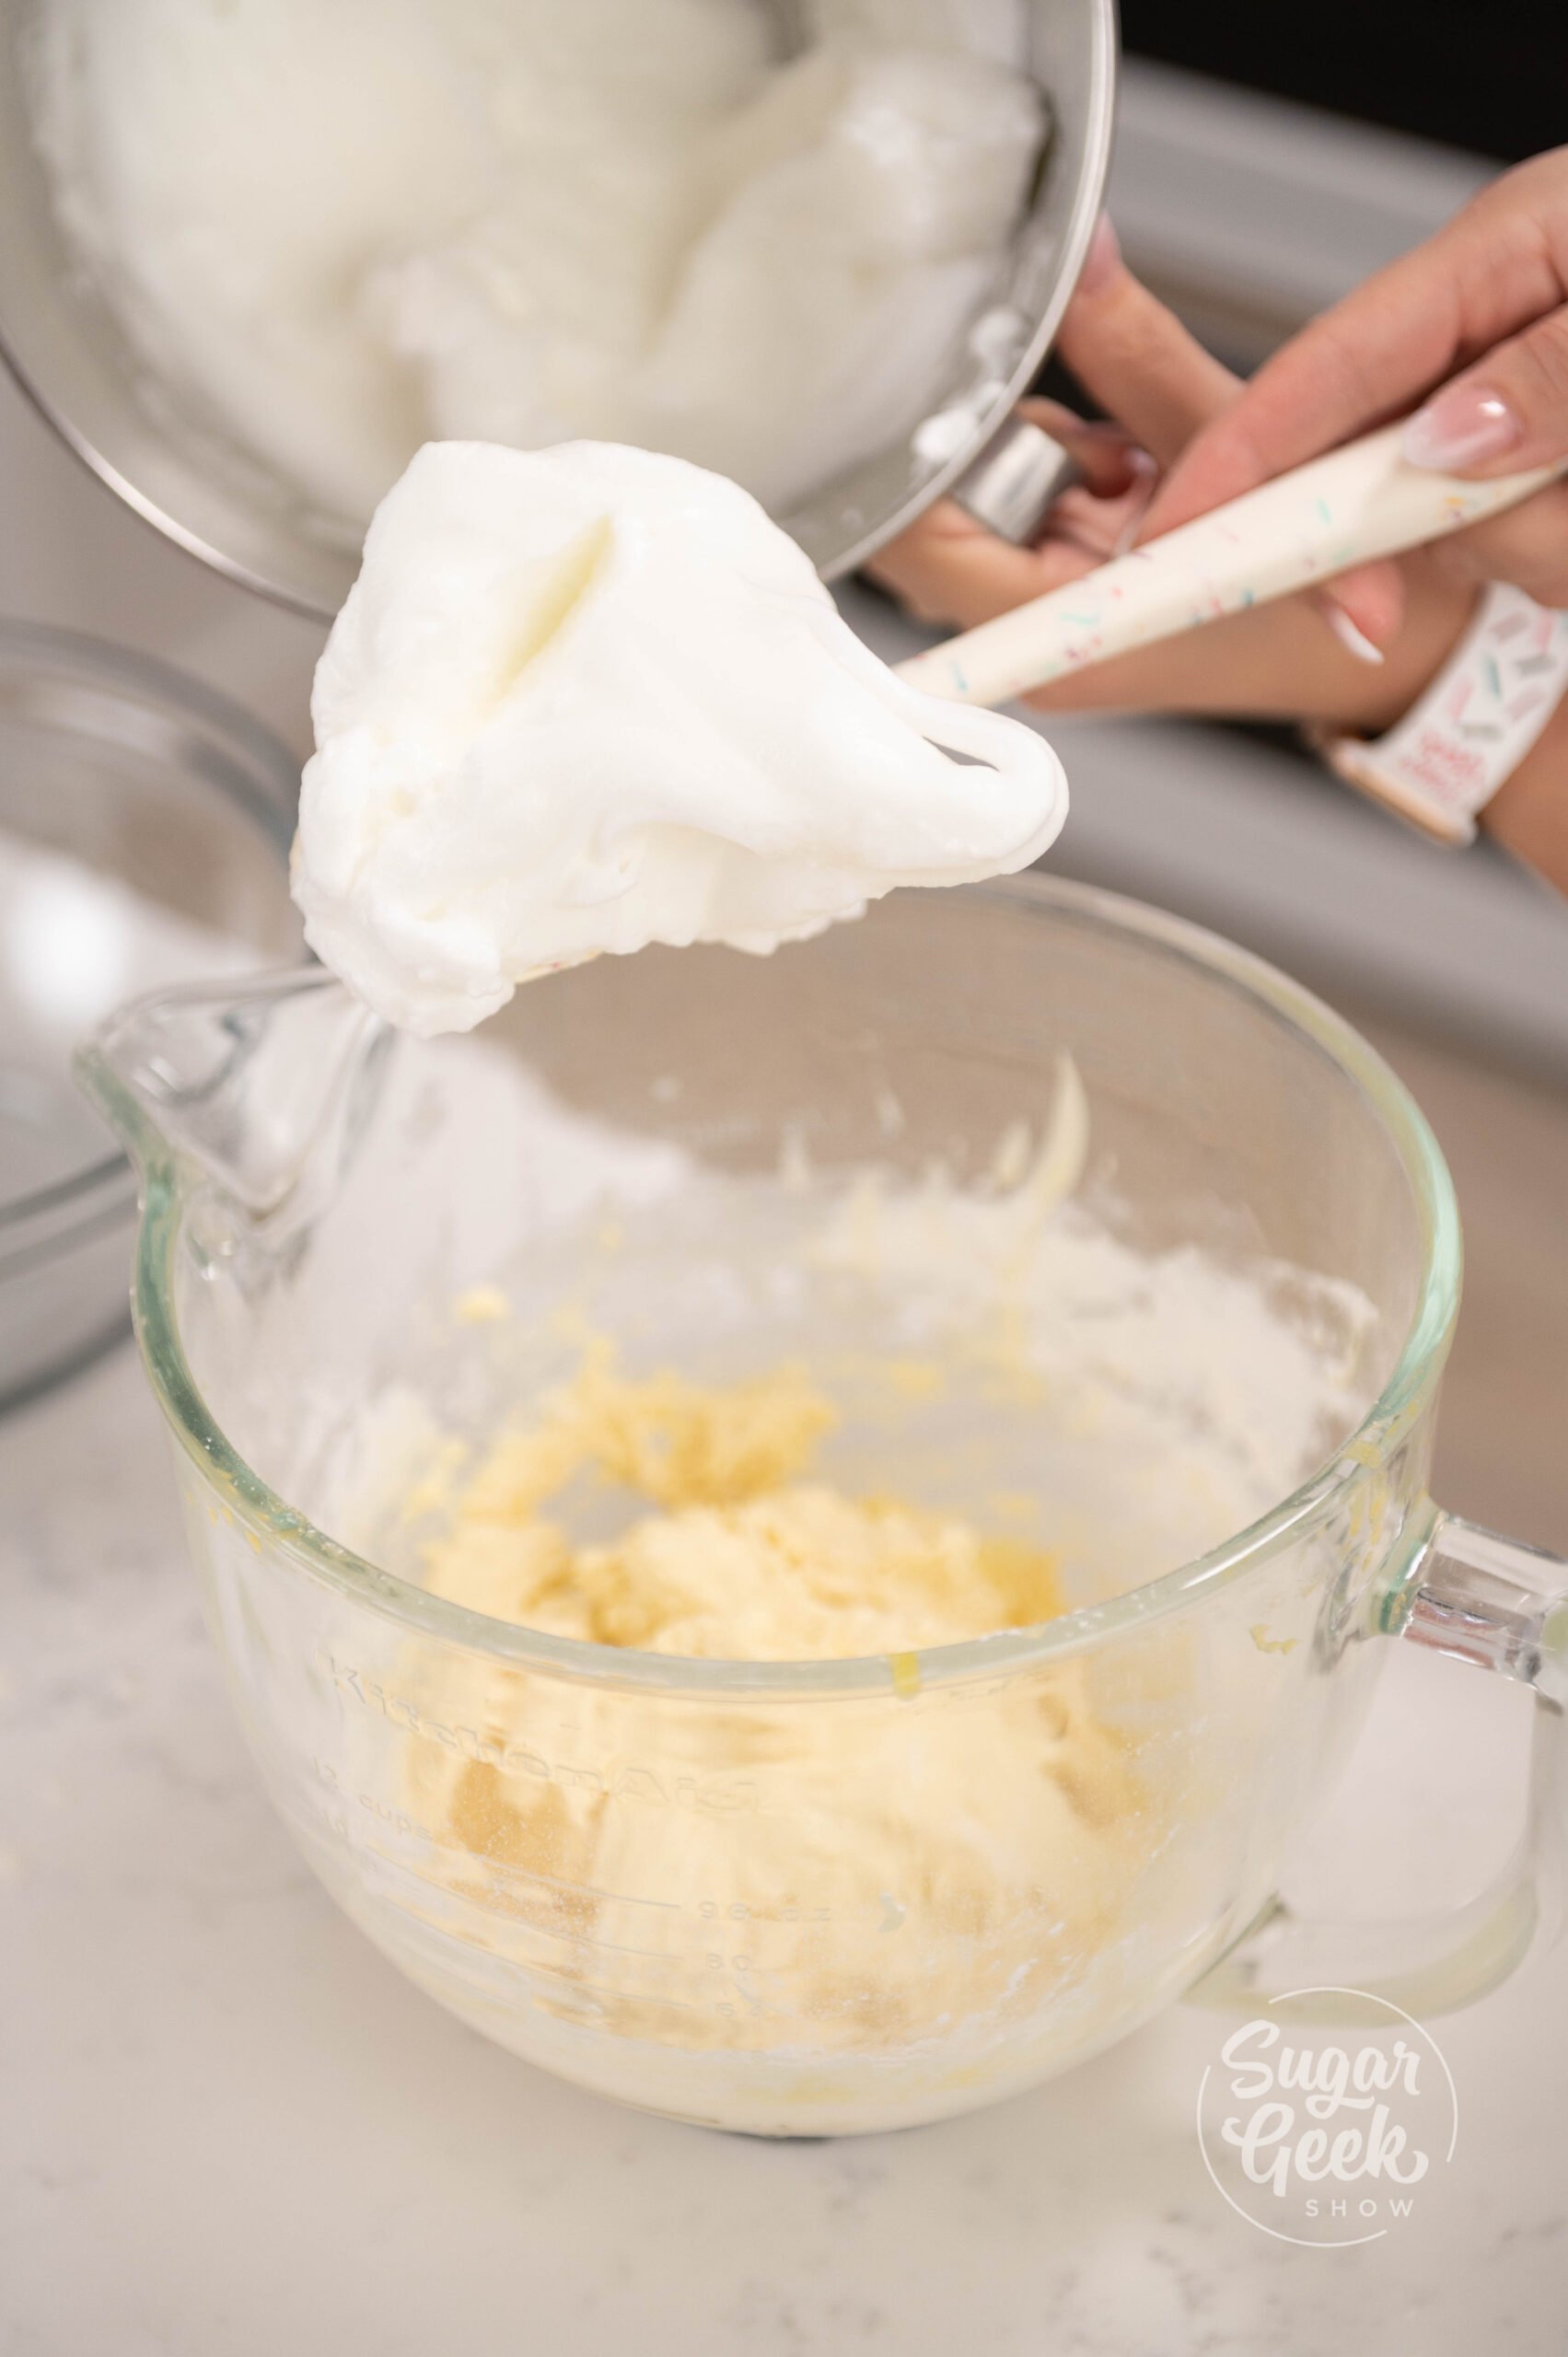 hand holding spatula covered in meringue over bowl of batter